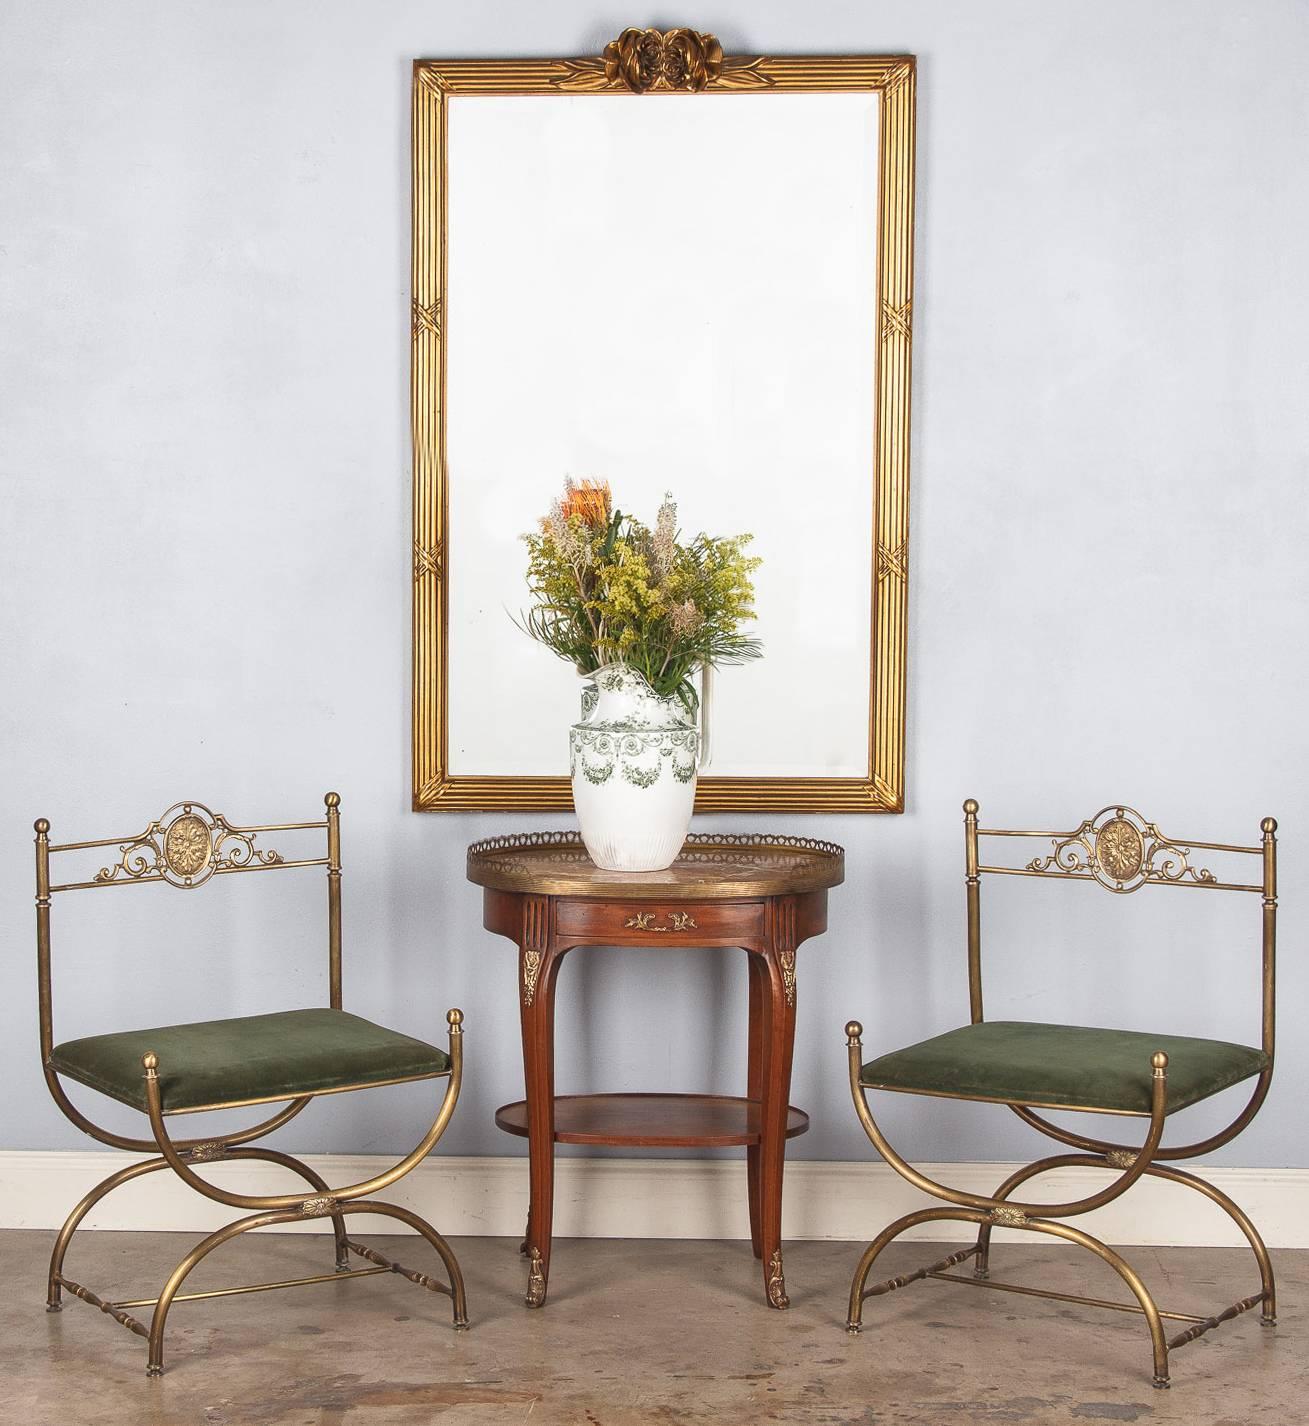 An elegant giltwood mirror in the Louis XVI style that was purchased in the Beaujolais Region. The frame has a fascia molding and cross ribbon motifs with carved roses at the crest. The mirrored glass is beveled.